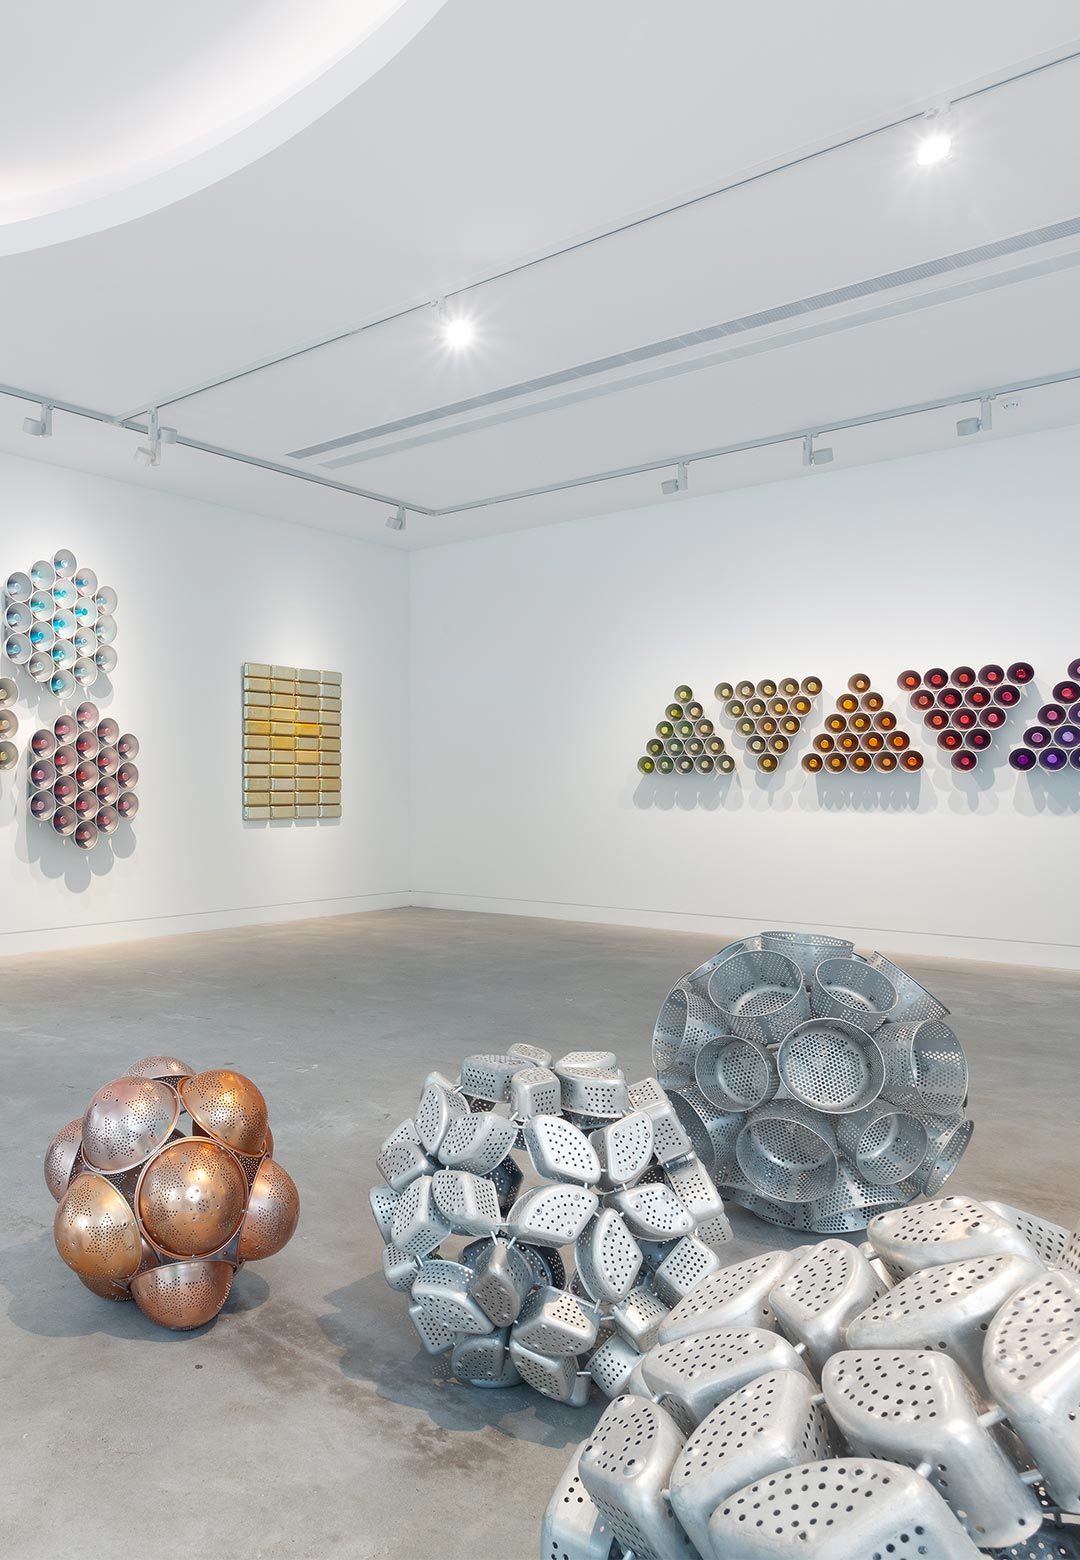 Culinary artefacts with layered meanings set stage at Donna Marcus’ solo show ‘Pallet’